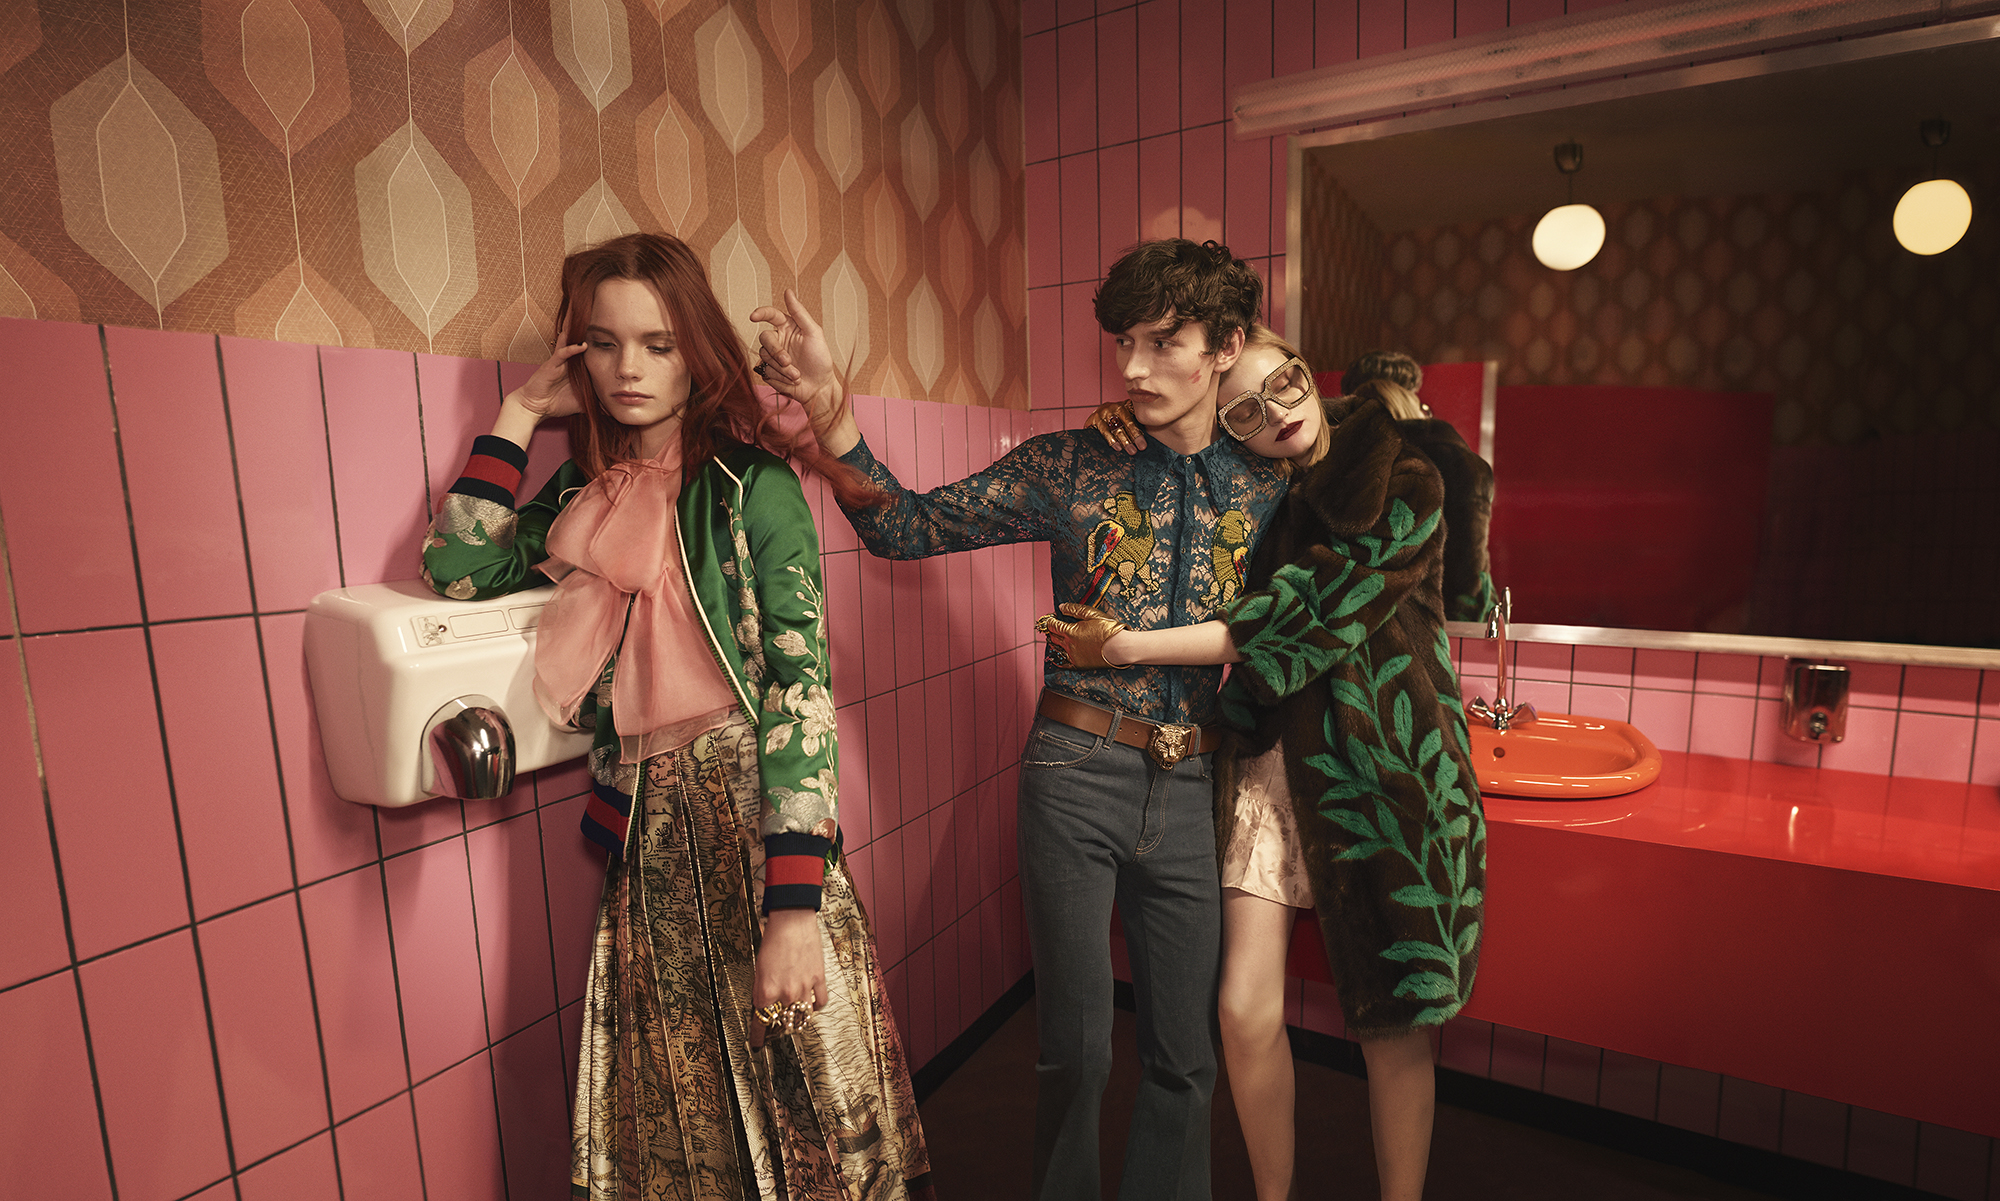 The Gucci SS16 campaign takes Berlin to 